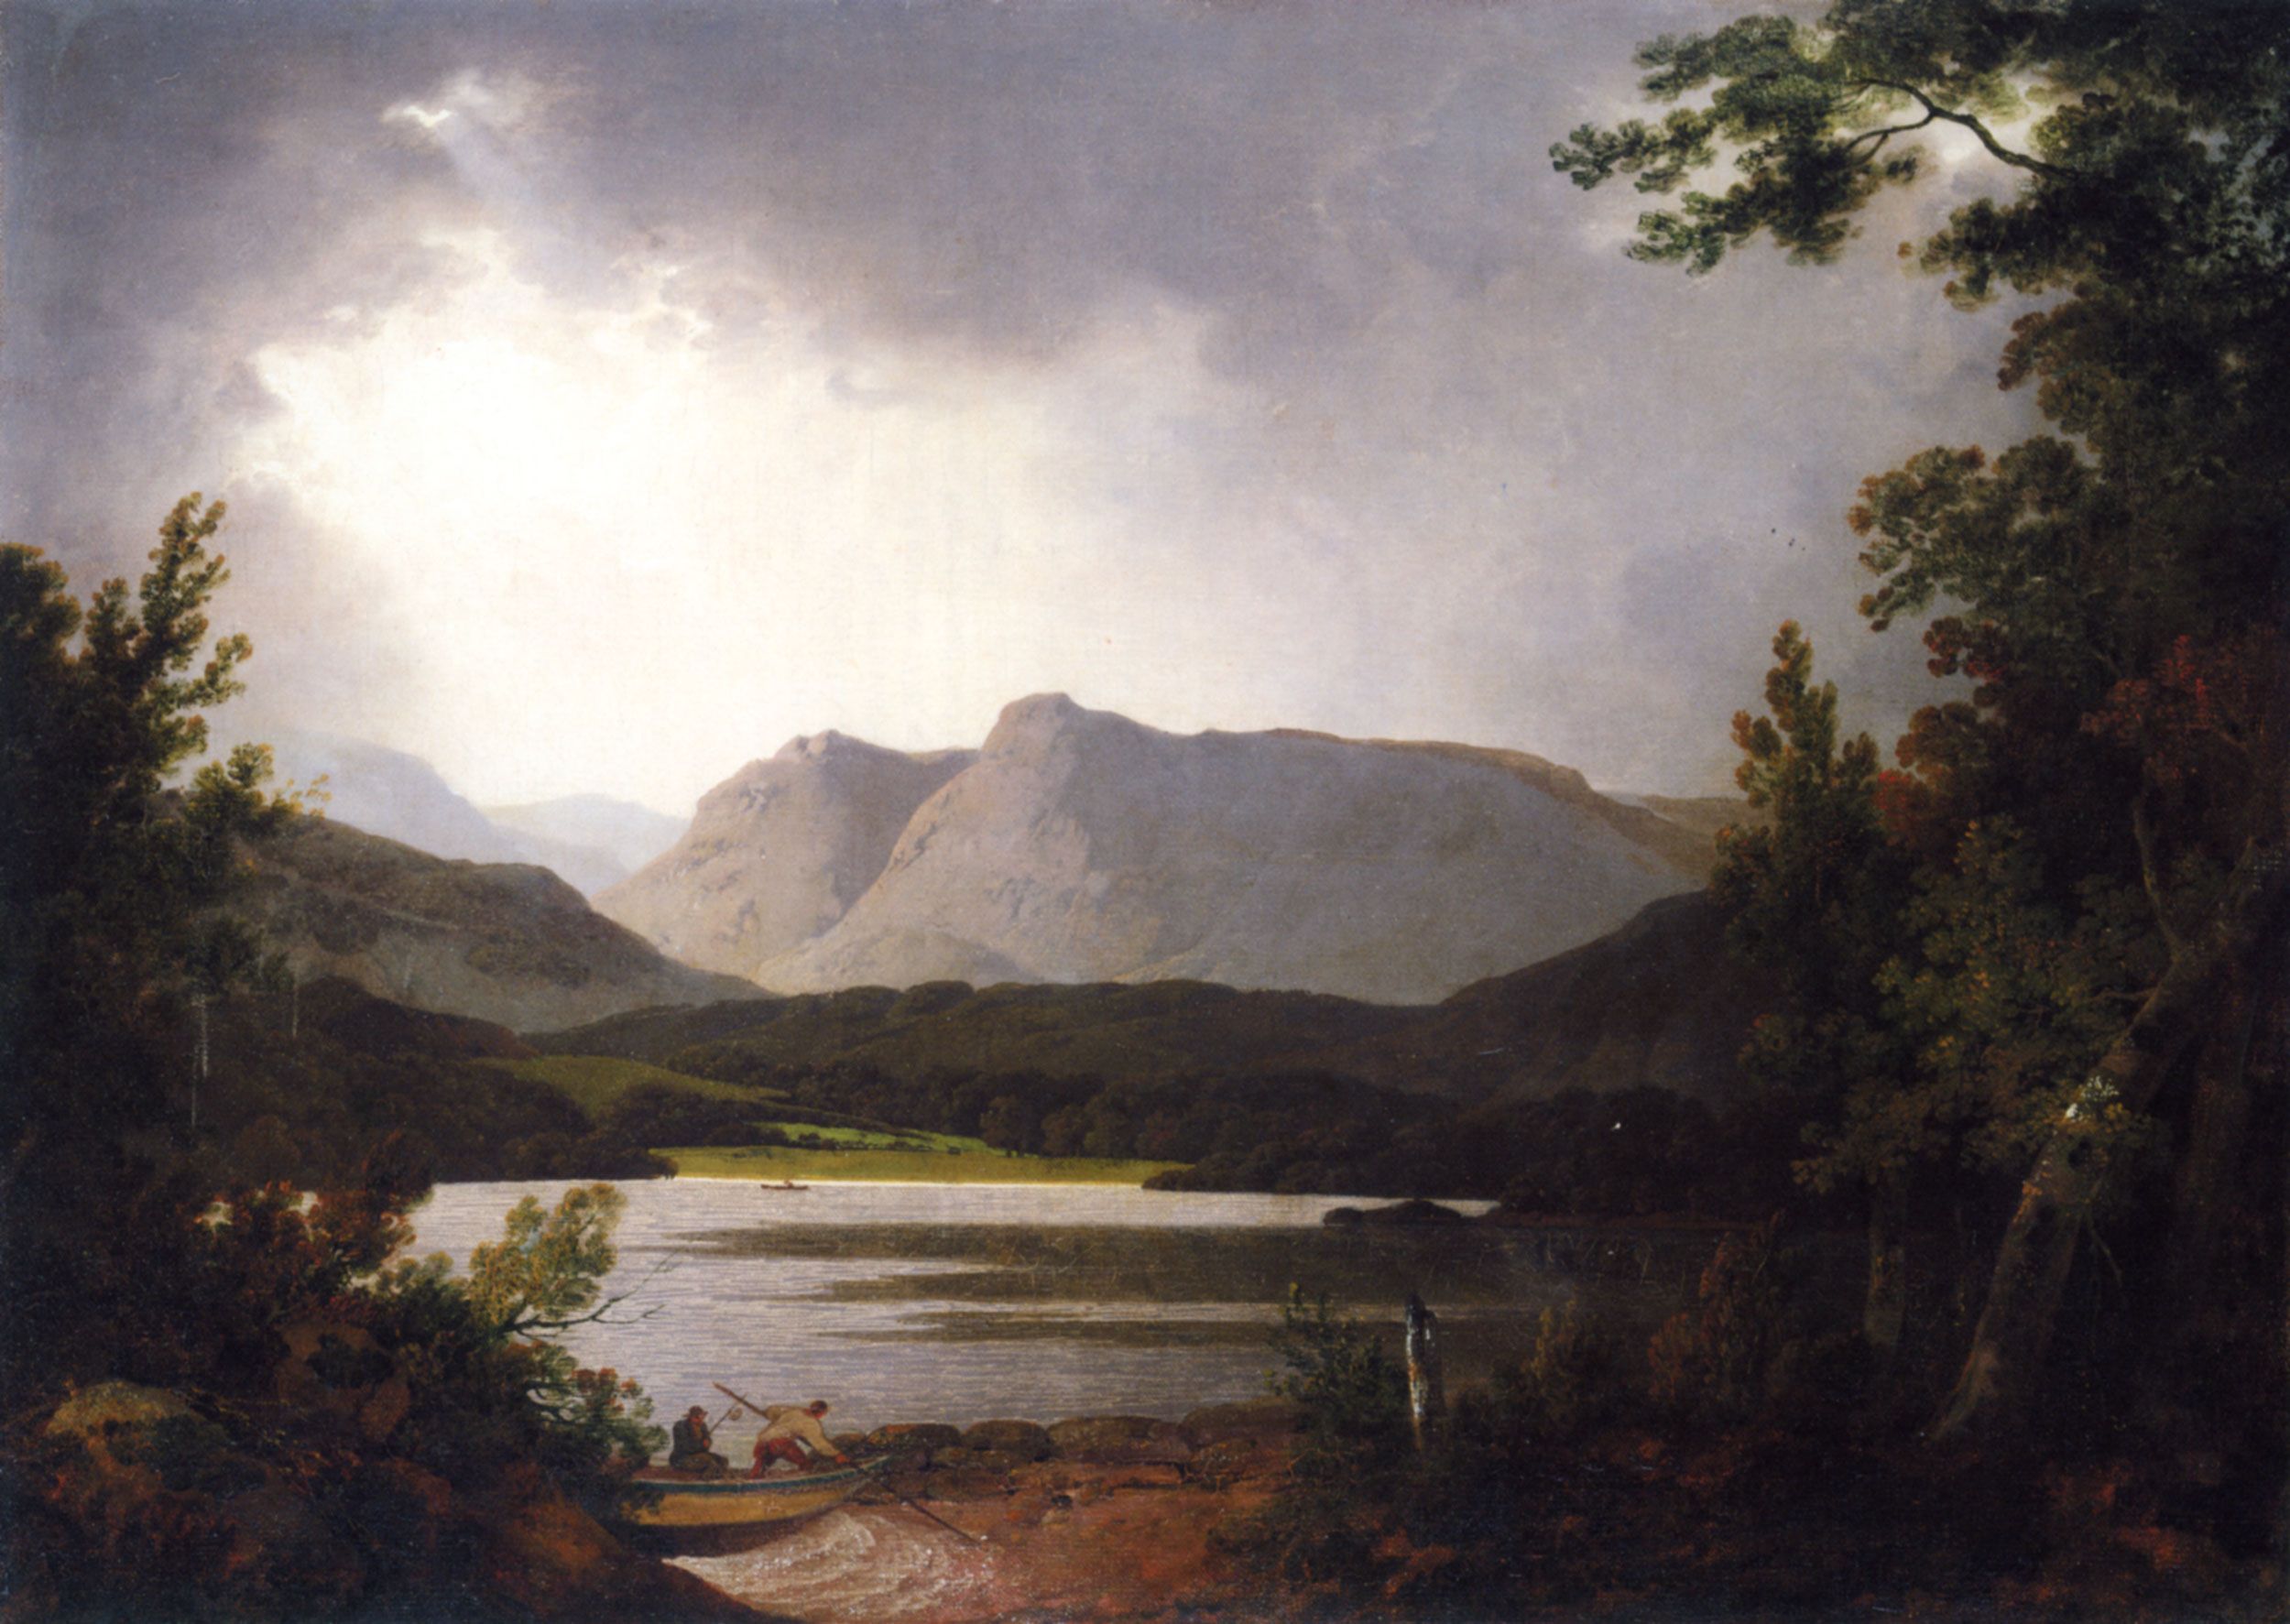 View of Lake Windemere with Langdale Pikes by Joseph Wright of Derby